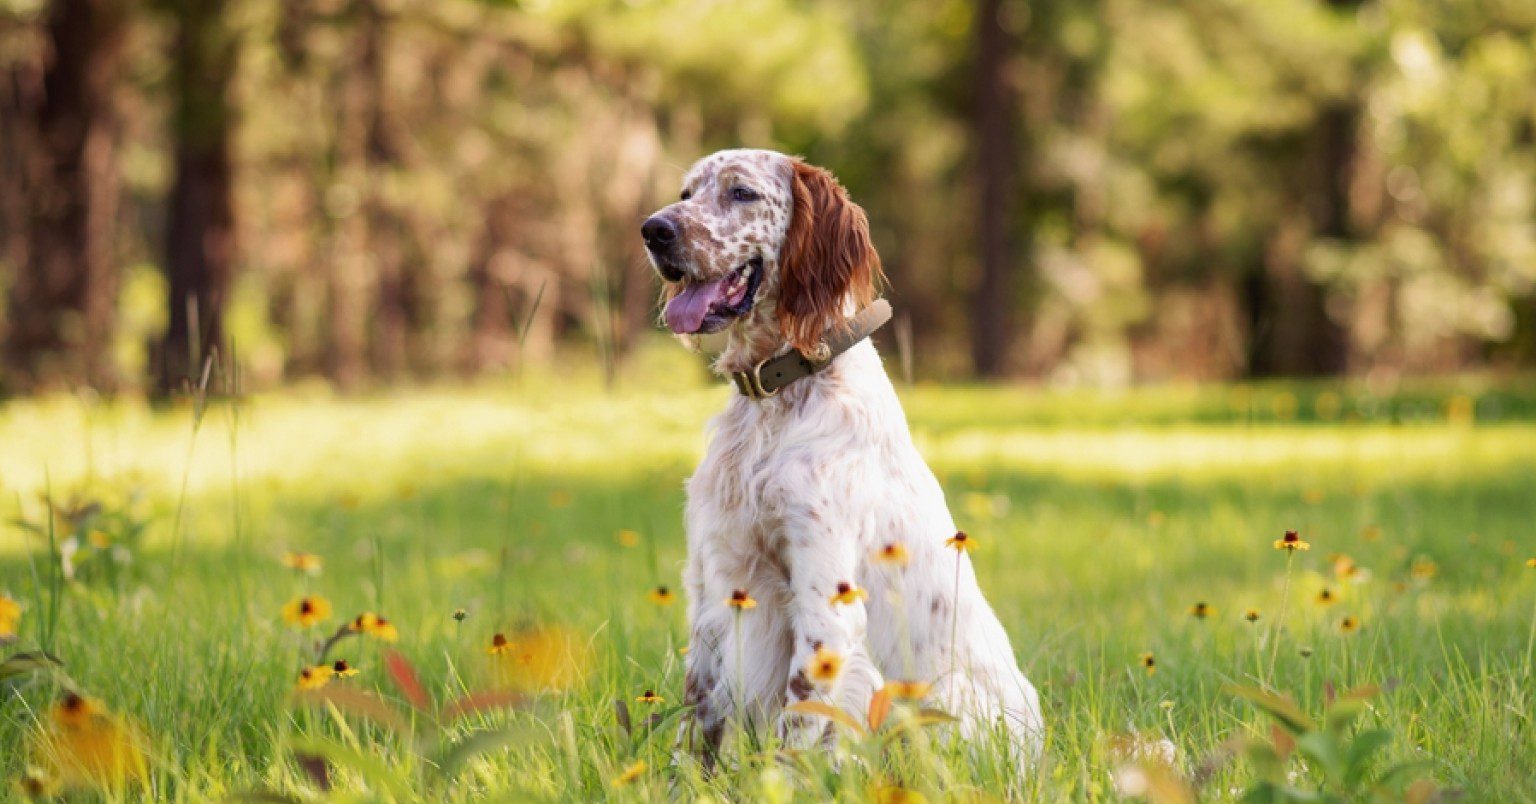 Photograph of a English Setter sitting in green grass